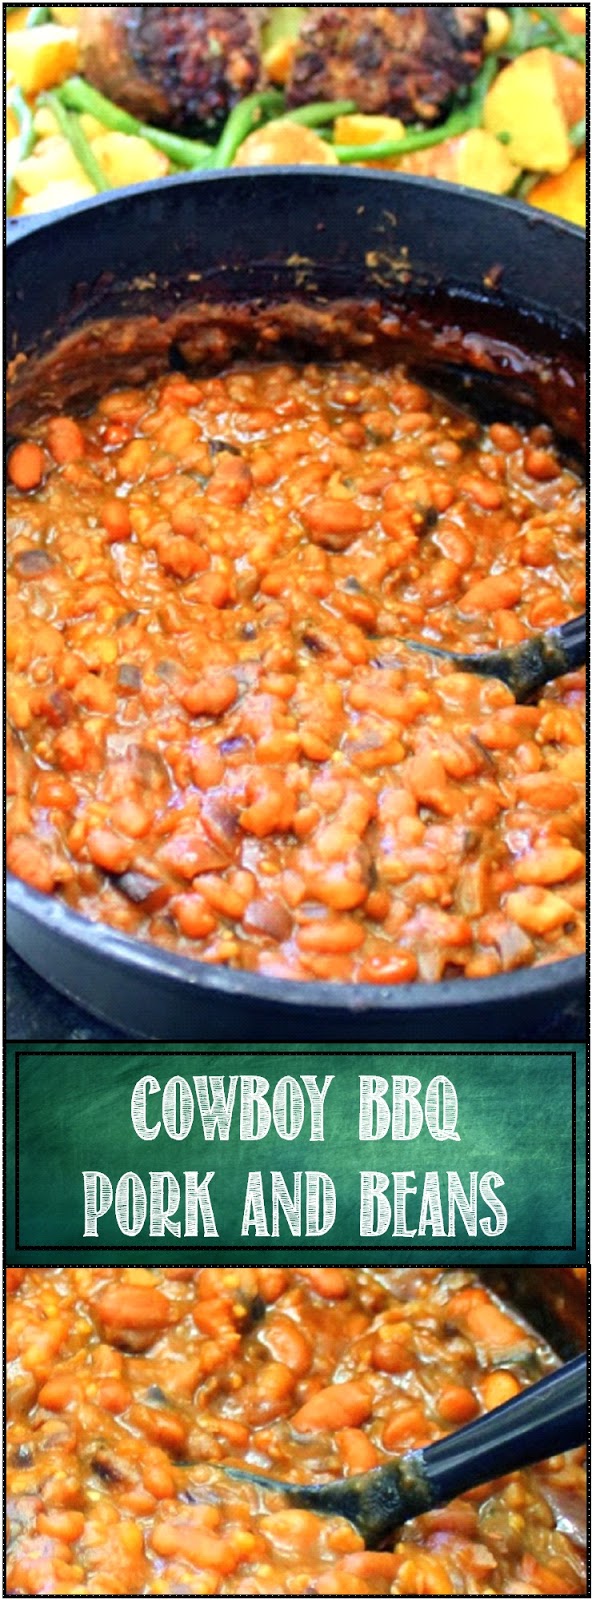 52 Ways to Cook: Cowboy BBQ Pork and Beans Quick and Sweet - Feeding ...